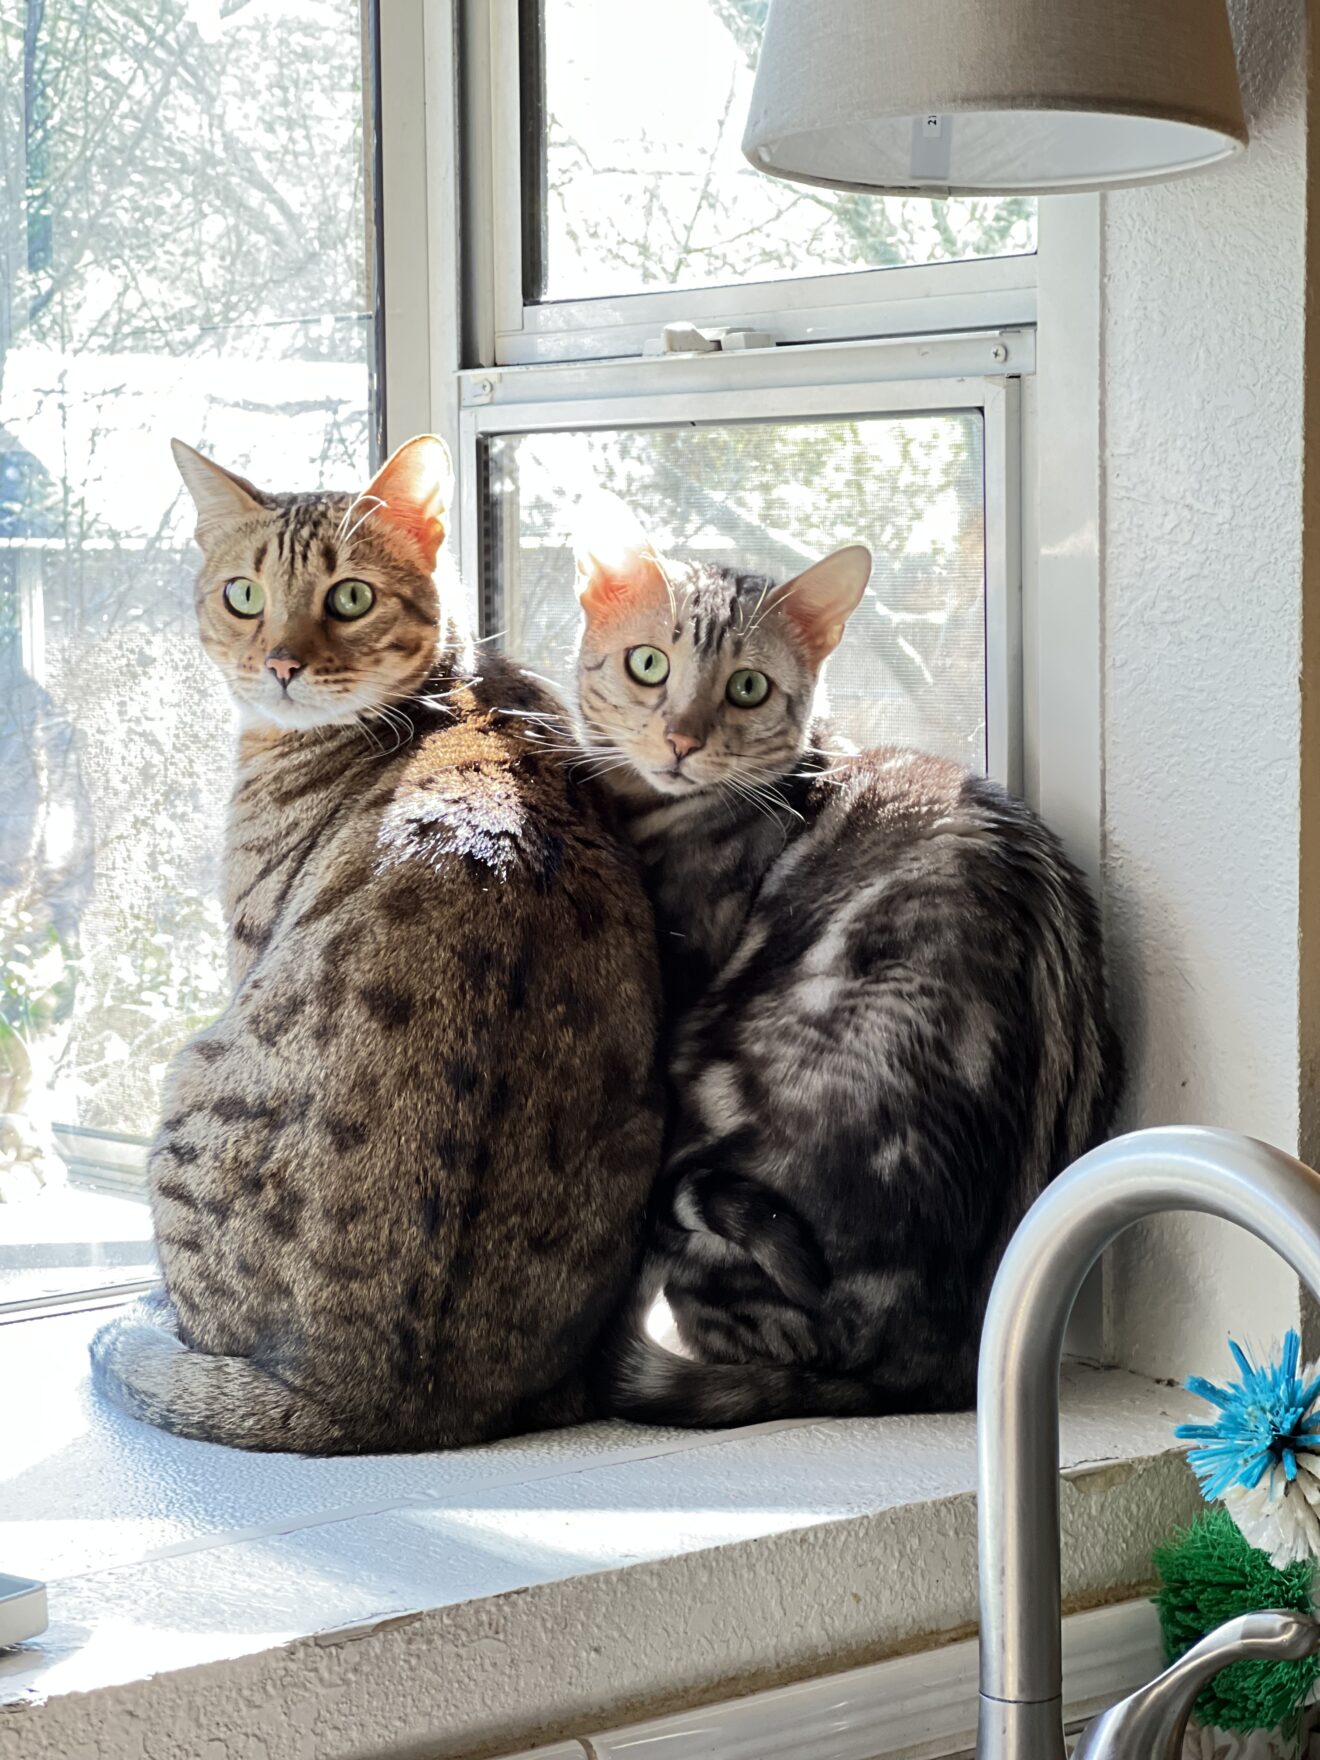 Two Bengal cats sitting in a sunny window above a kitchen sink, looking over their shoulders at the camera.